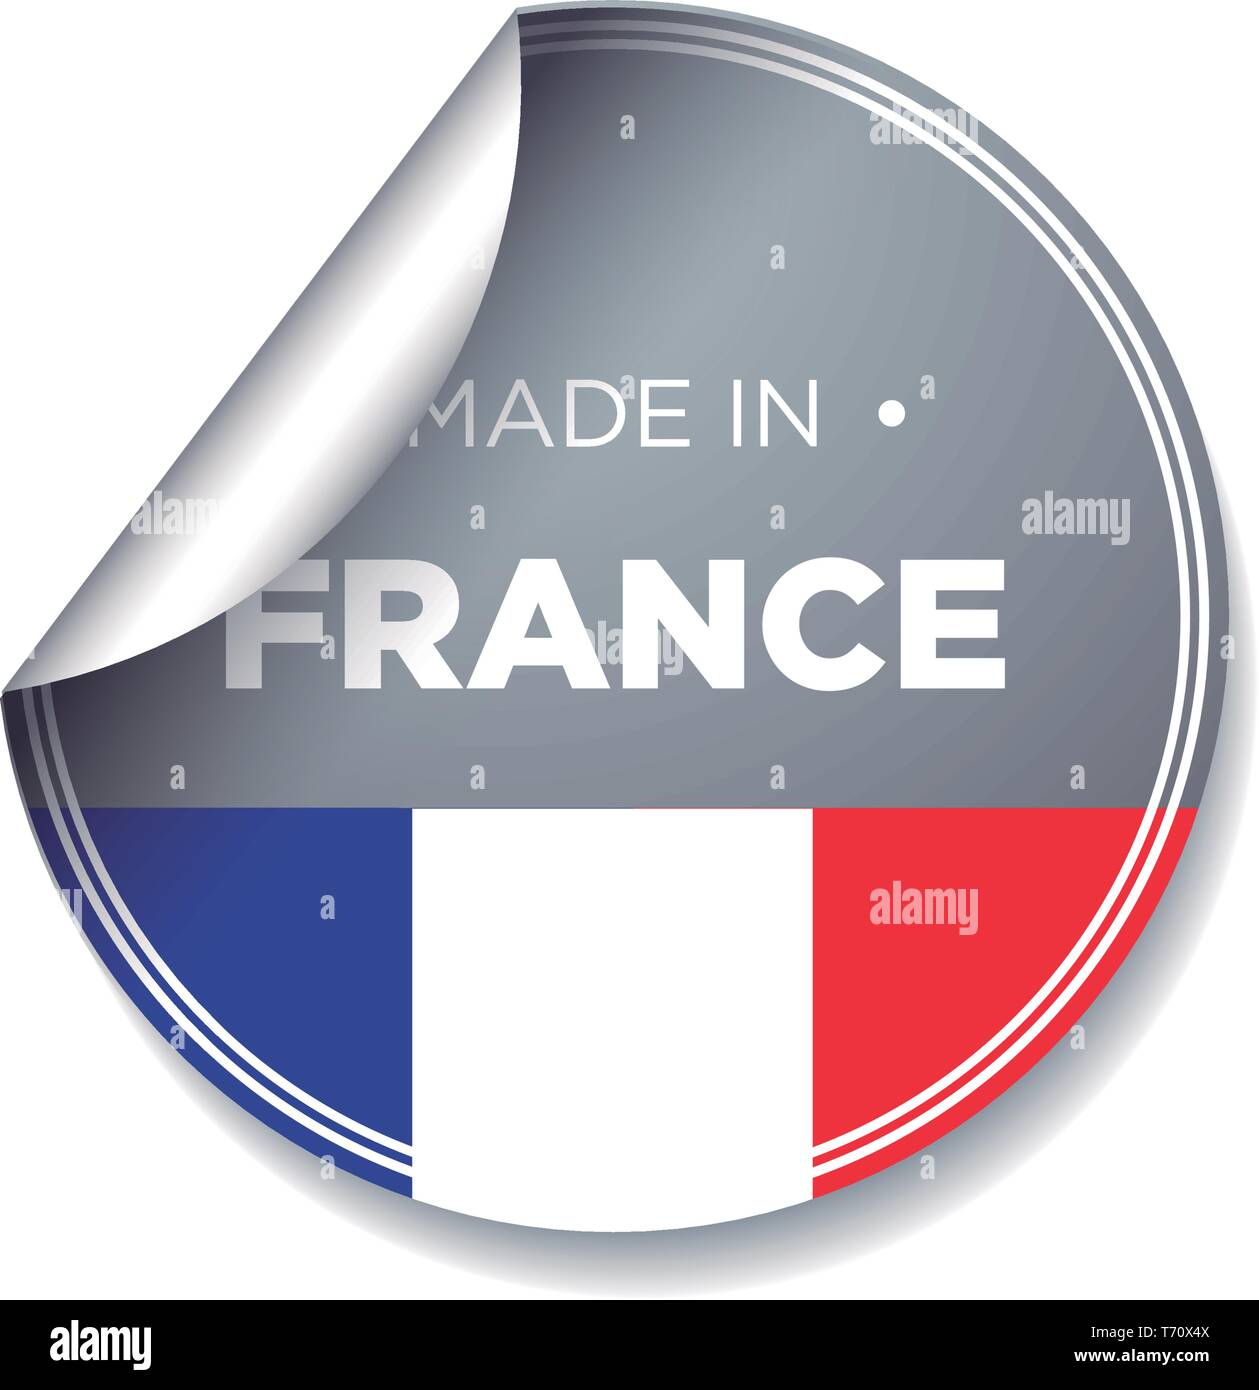 MADE IN FRANCE Stock Vector